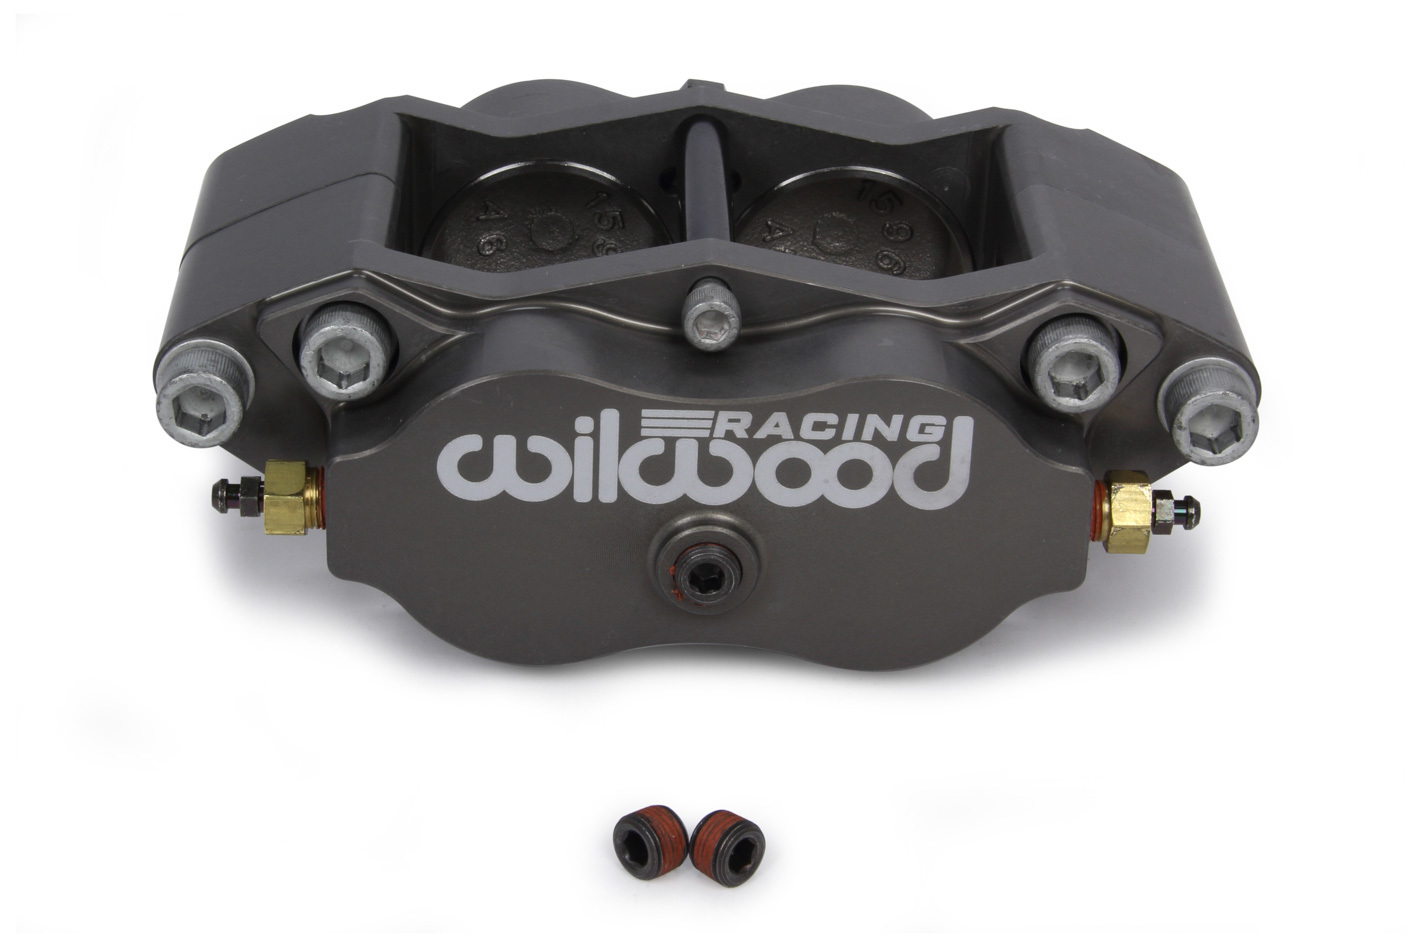 Wilwood 120-14765-SI Brake Caliper, Billet Narrow Dynalite, 4 Piston, Aluminum, Gray Anodized, 0.810 in Thick Rotor, 4.750 in Radial Mount, Each